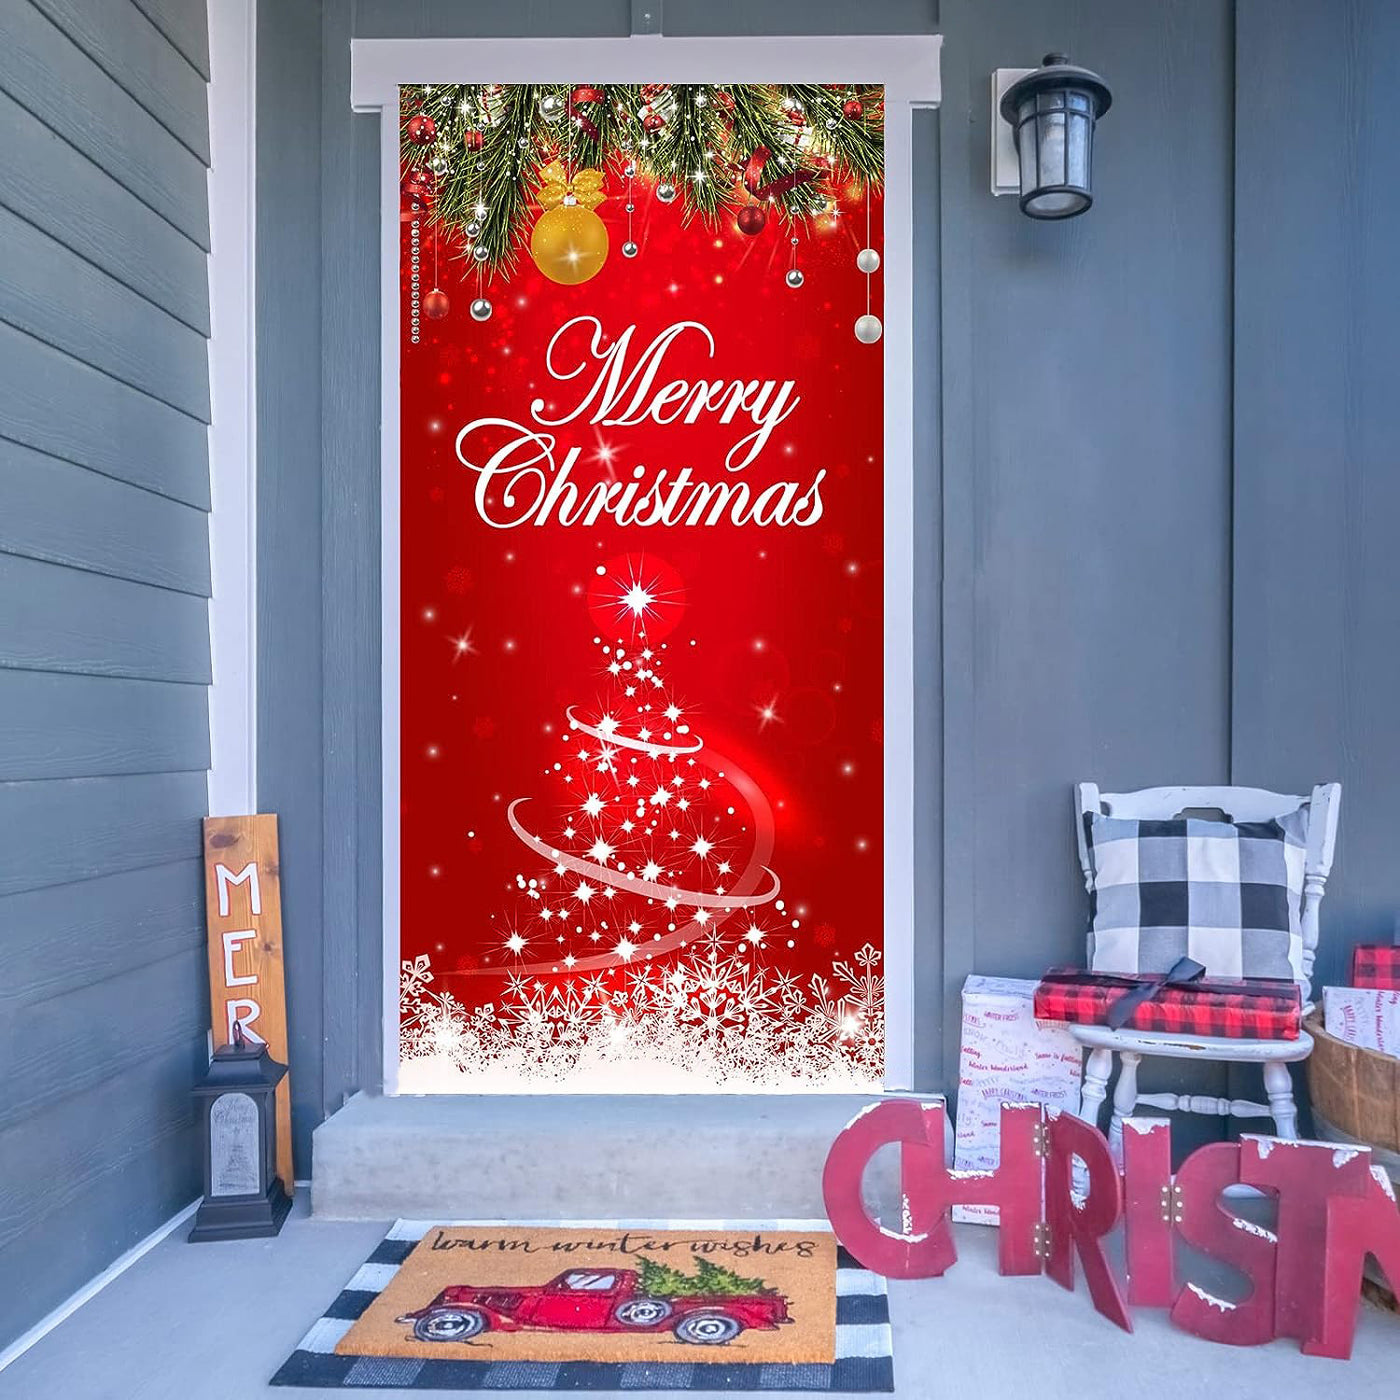 Merry Christmas Eve In Red Front Door Wrap Cover Xmas Decoration